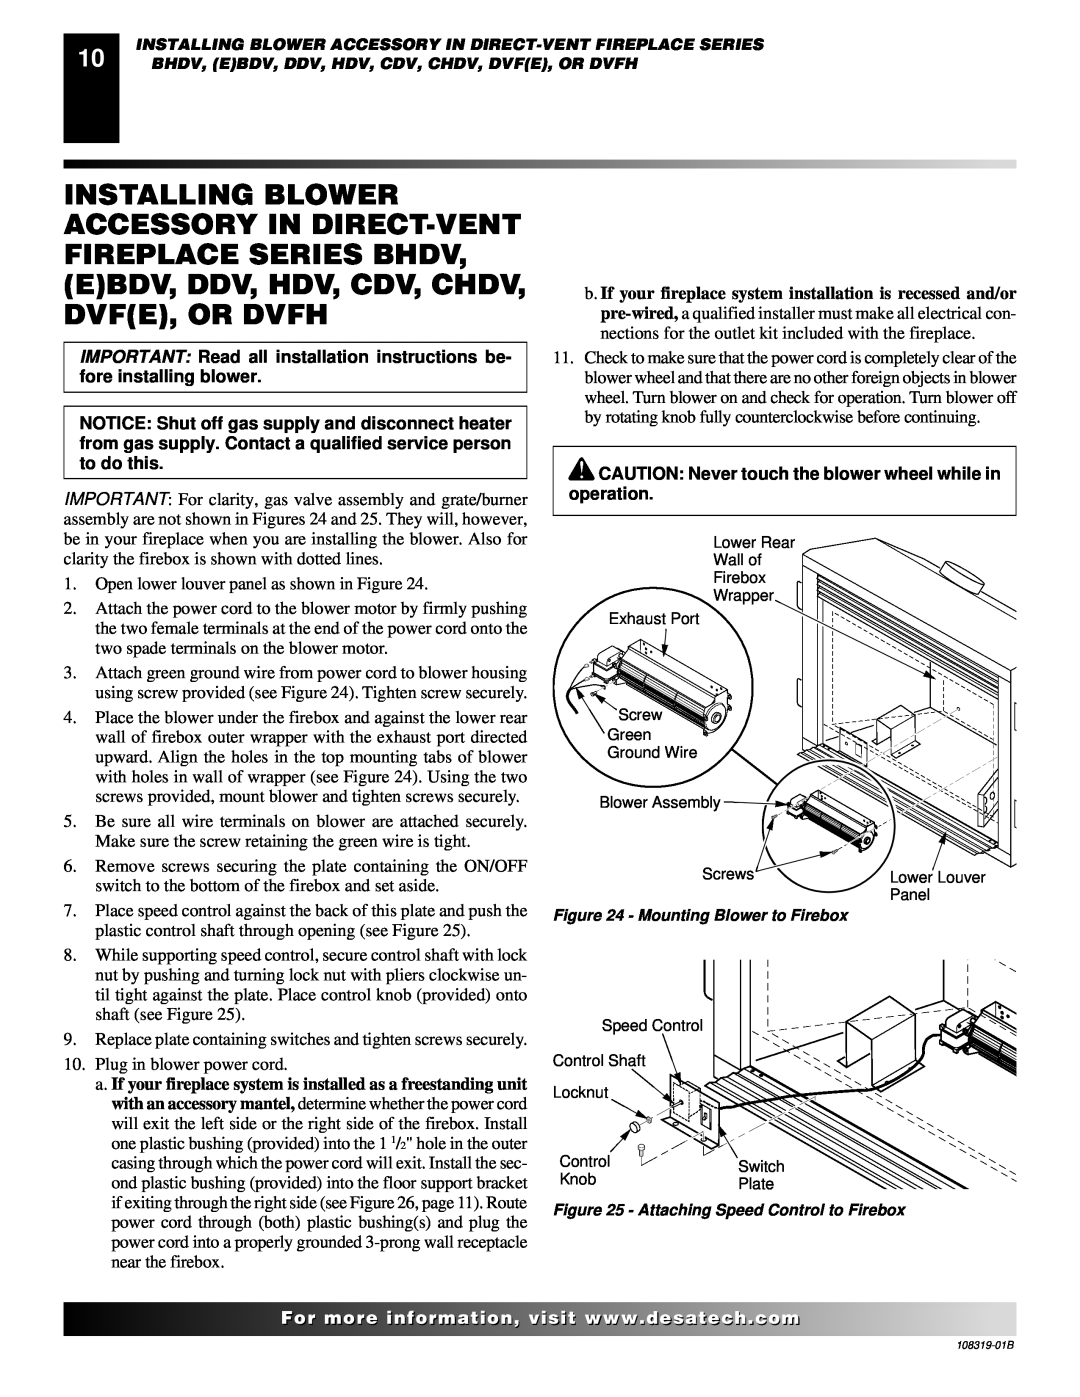 Desa Ga3750a installation instructions Mounting Blower to Firebox, Attaching Speed Control to Firebox, Lower Louver, Switch 